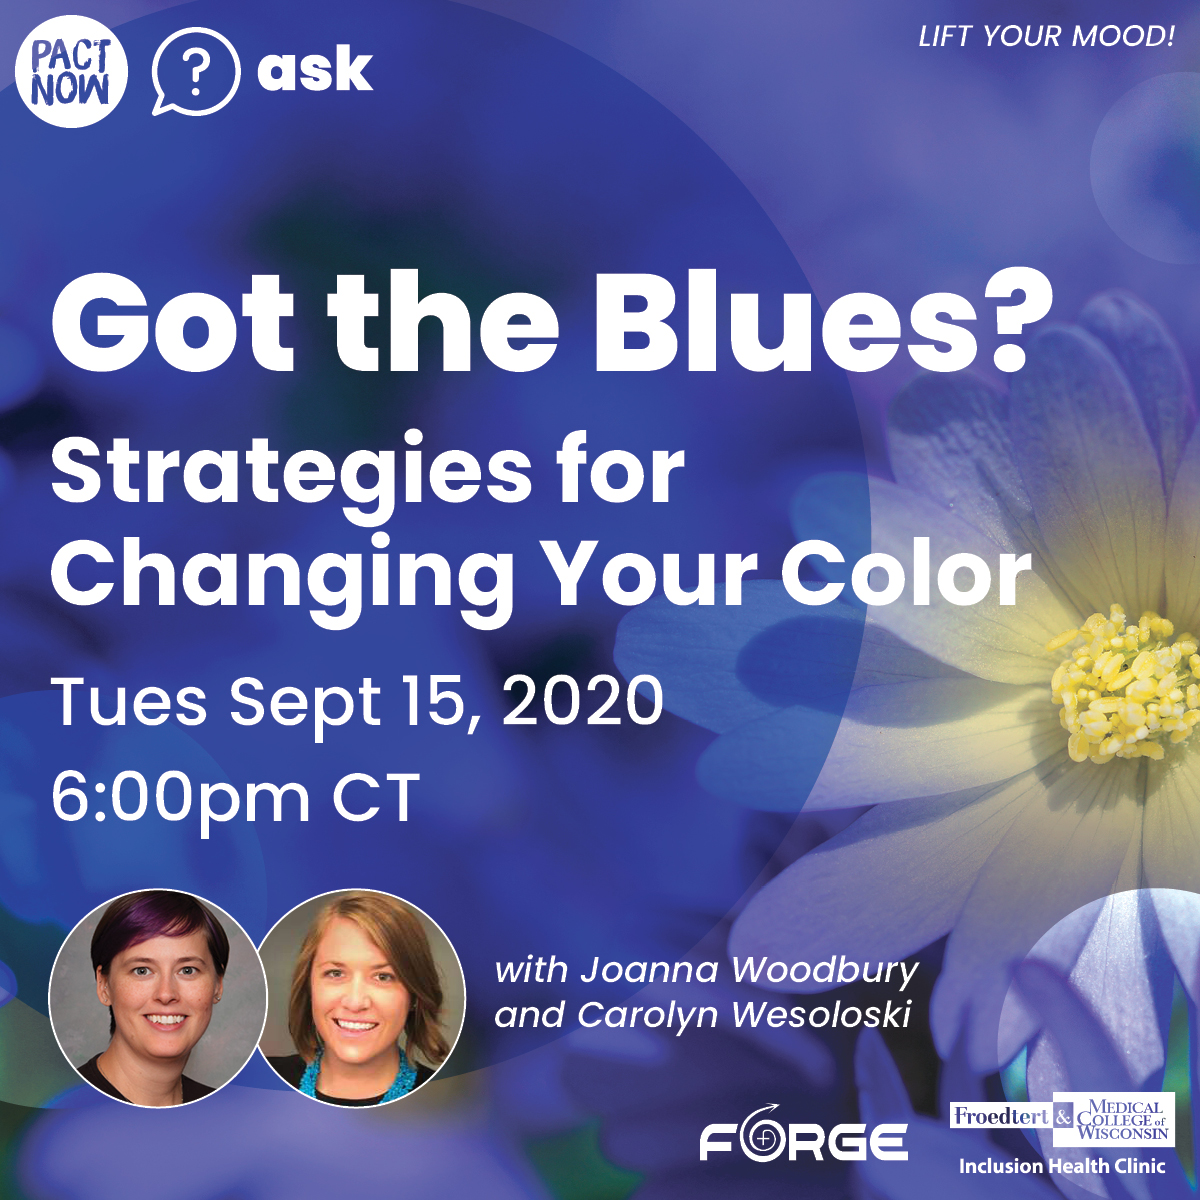 PACT NOW - Got the Blues? Strategies for Changing Your Color square